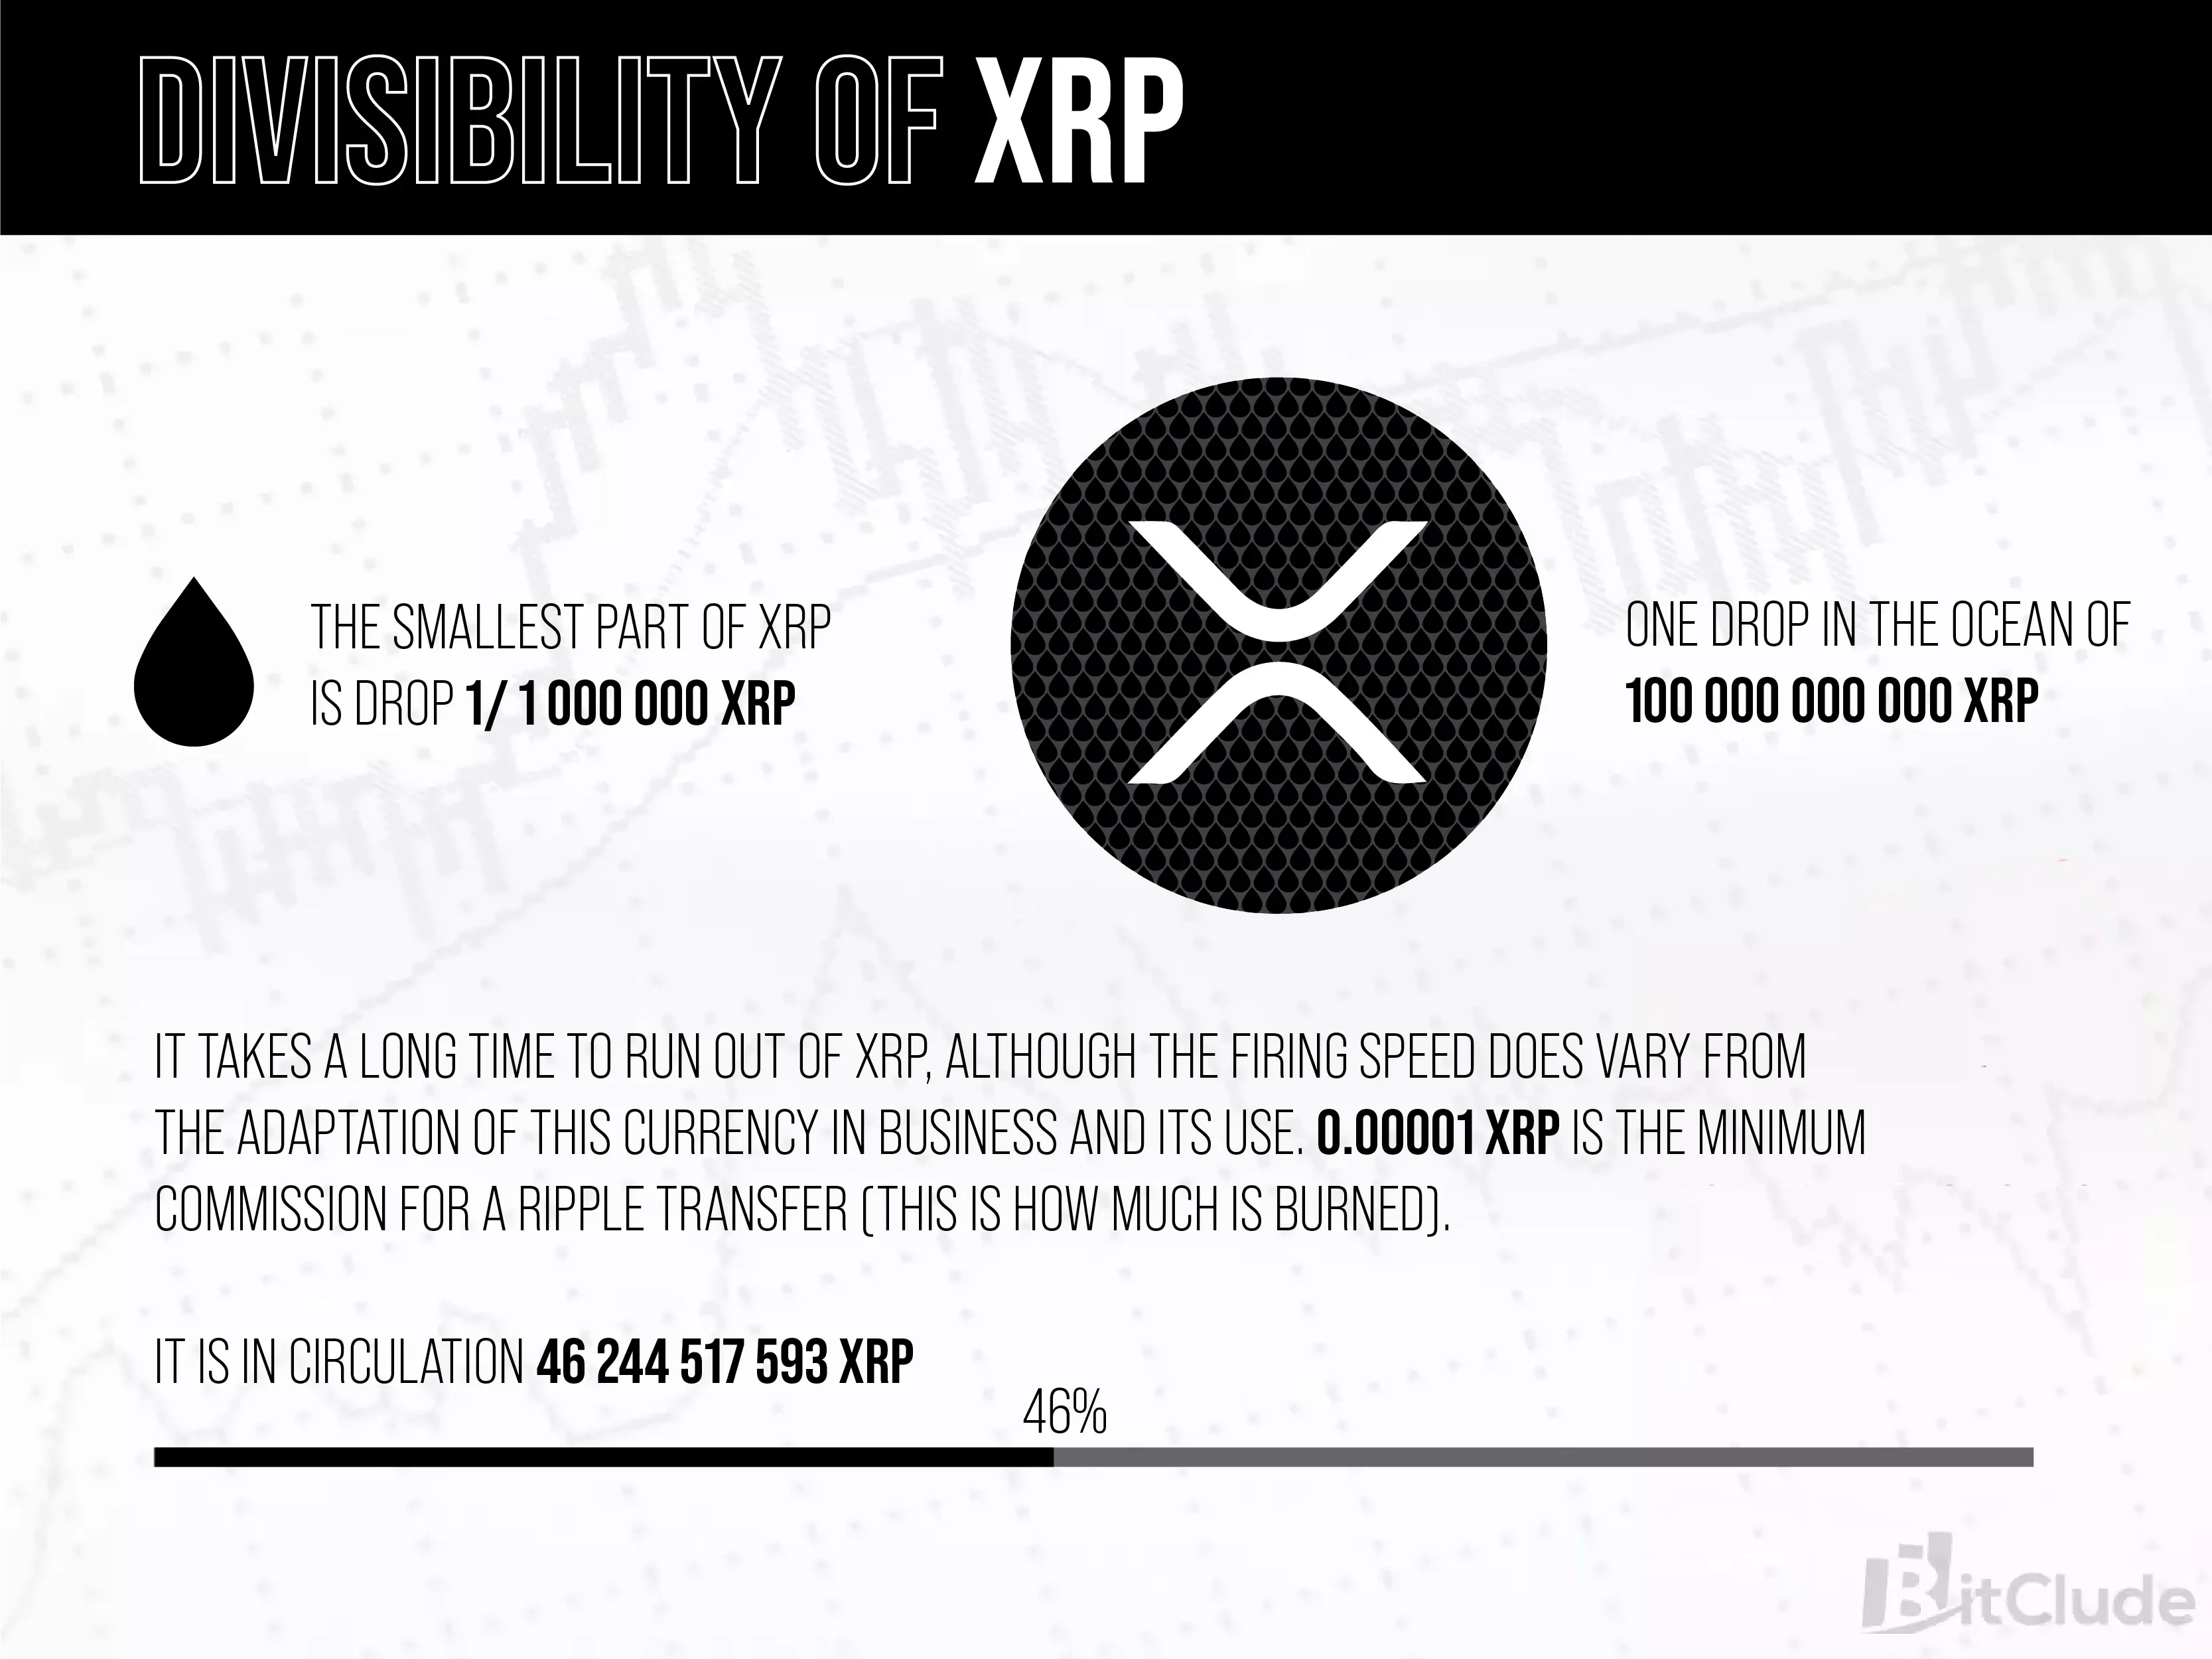 Divisibility of XRP into smaller units, XRP burning as a fee per transaction.